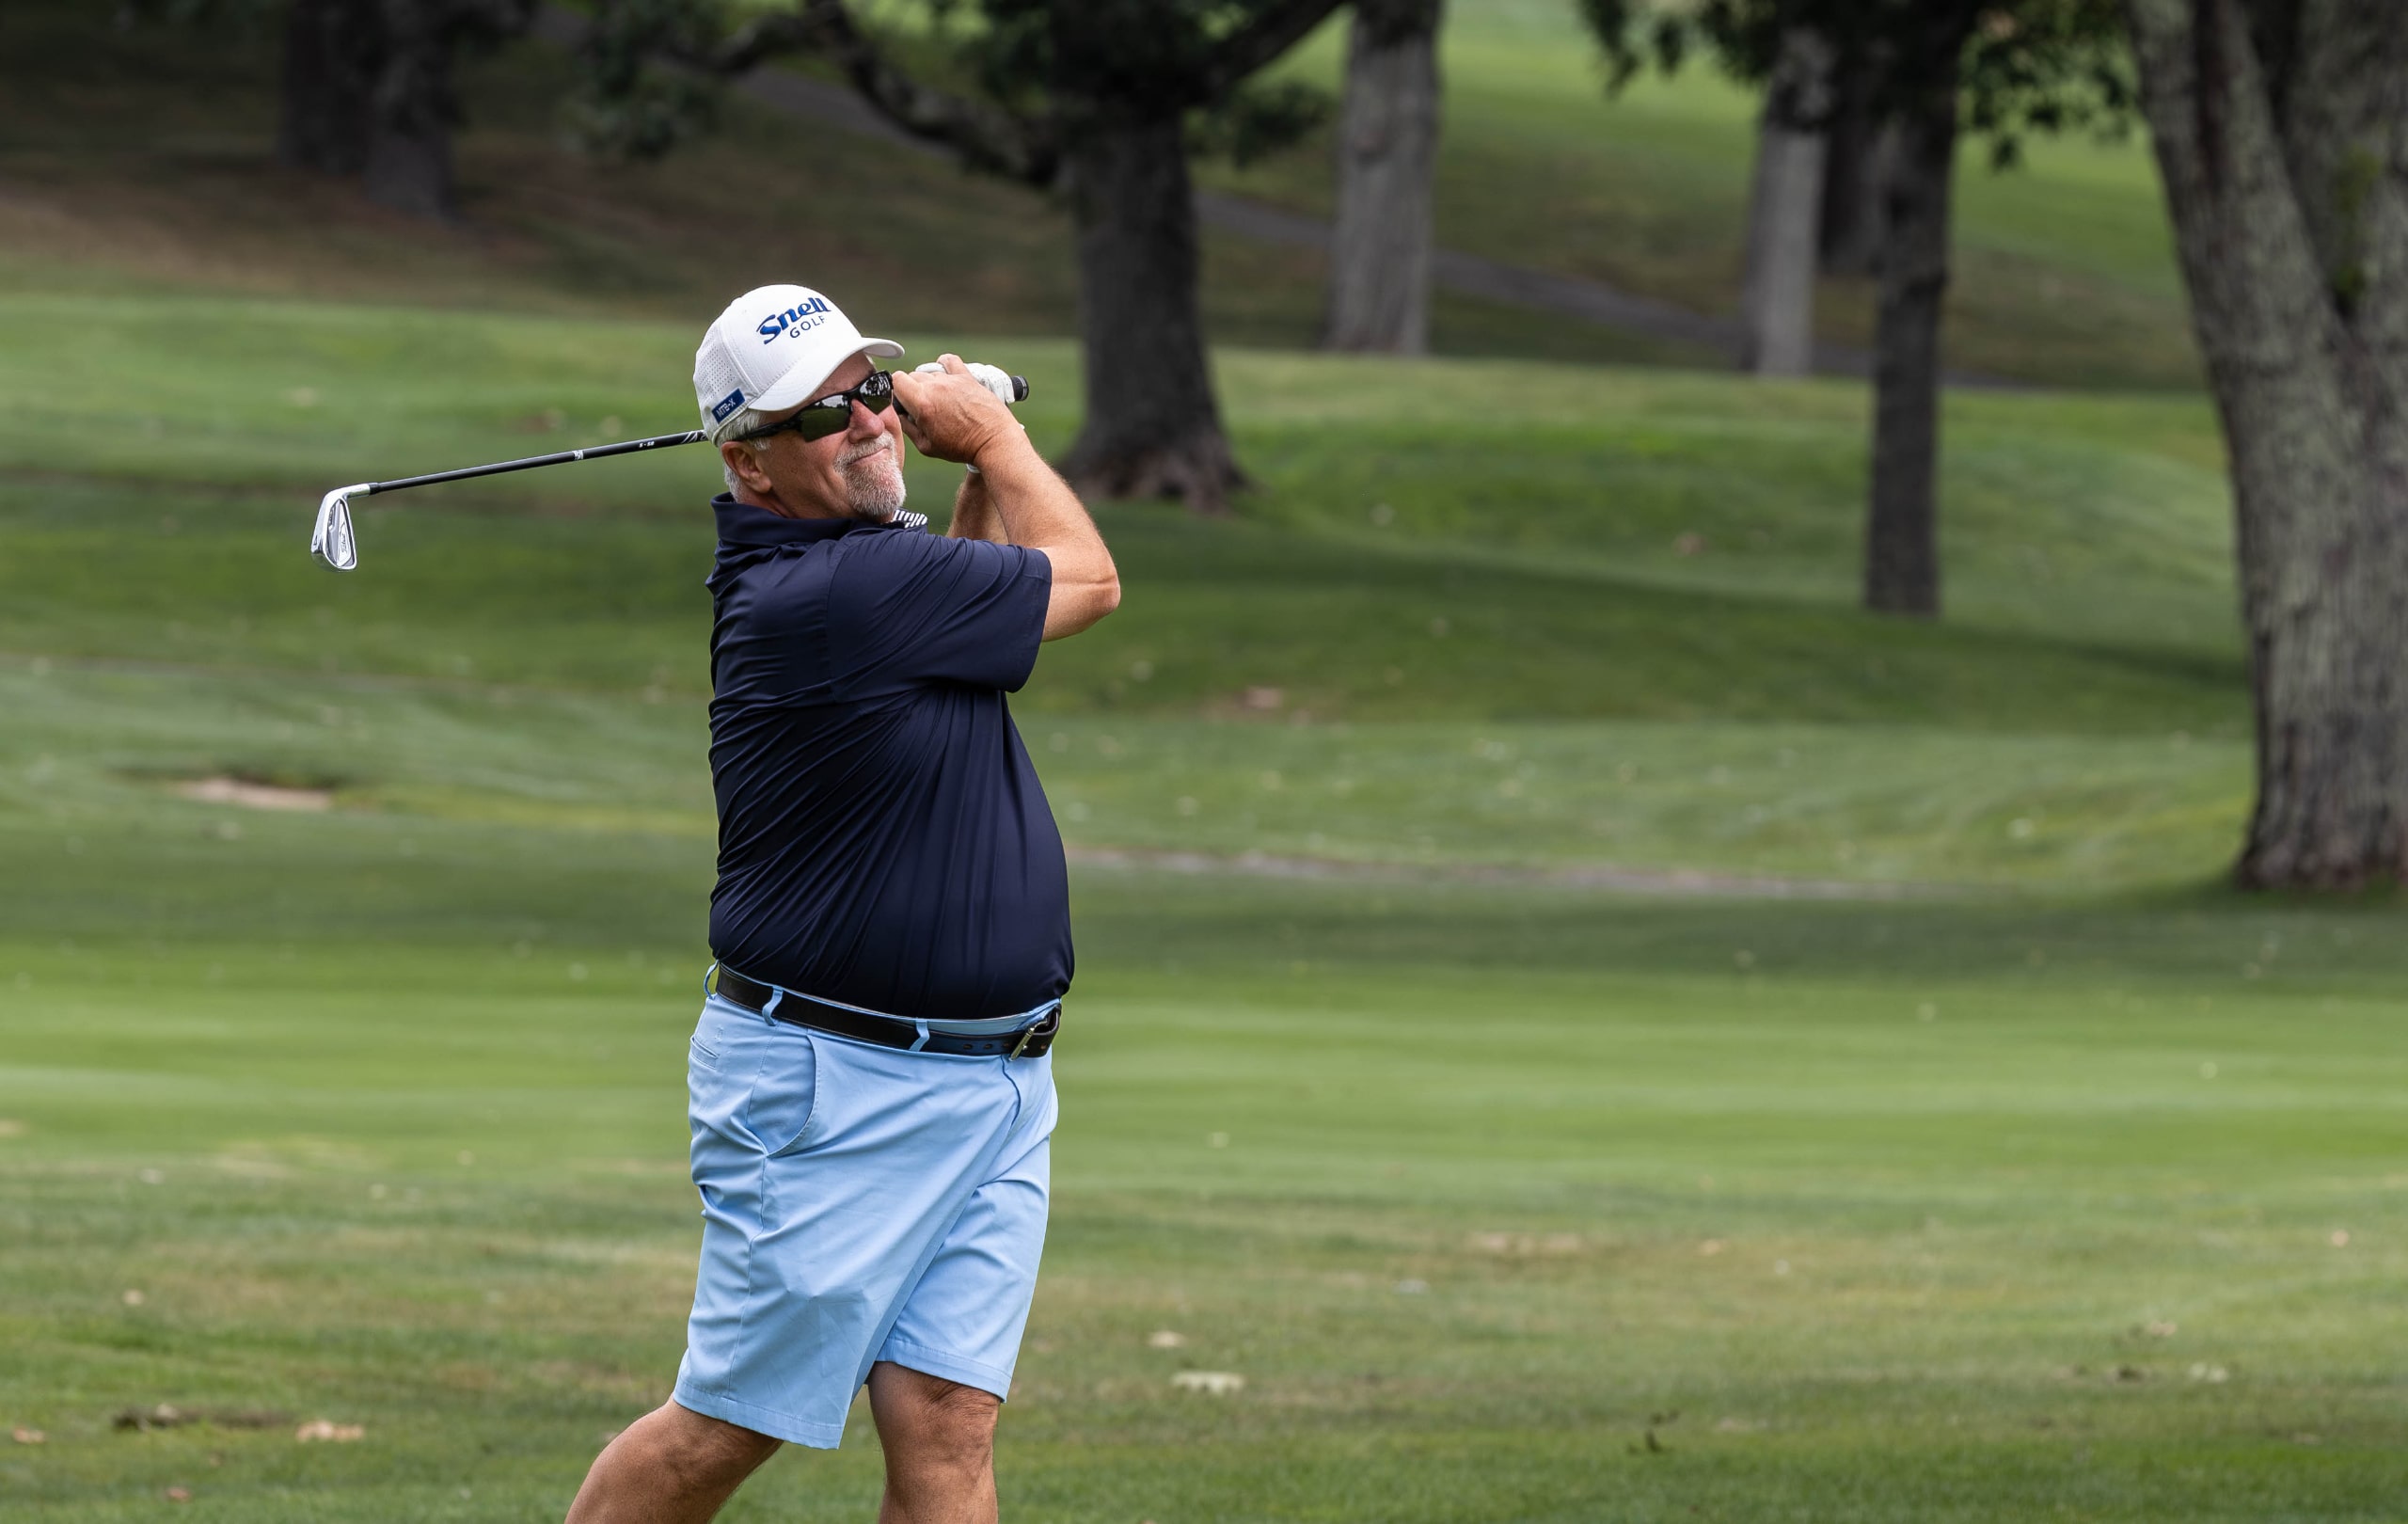 Country-Club-Of-New-Bedford FB-2023-Mens-FB-Gallery August-2023-Country-Club-Of-New-Bedford-FB-2023-Mens-FB-Gallery August-2023-Mens-FB-Gallery-Thursday-Photos-Image-8